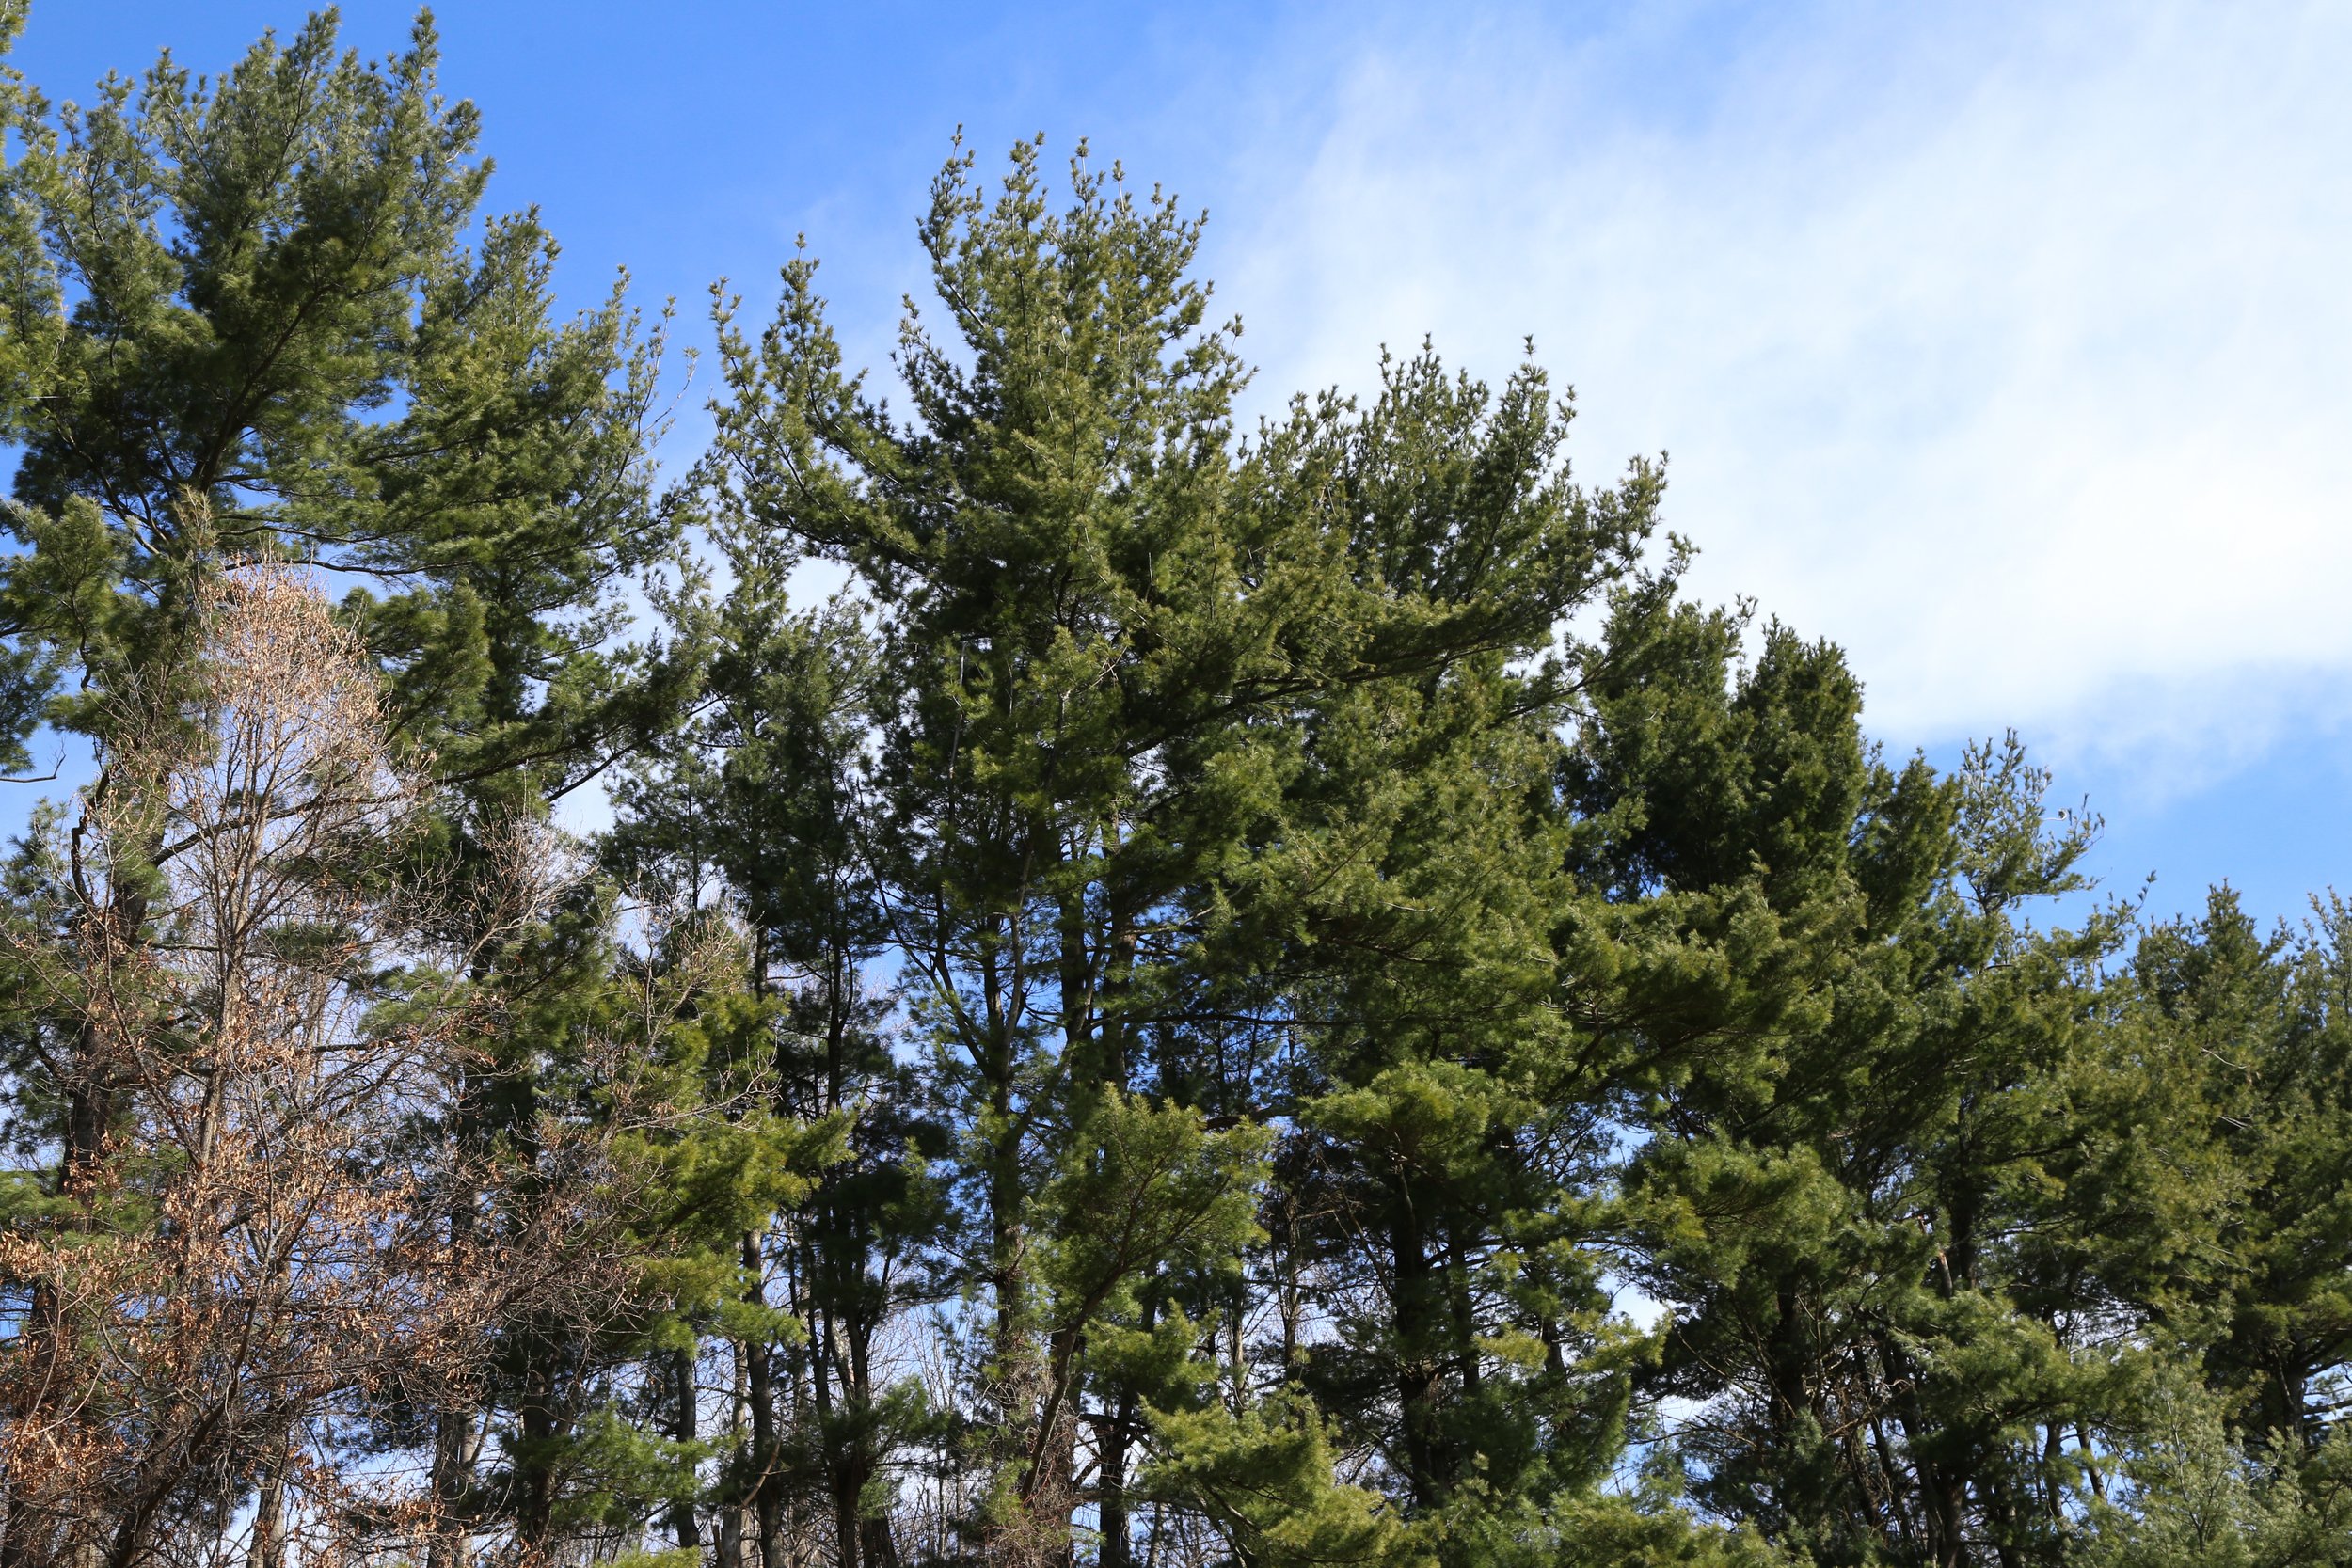  White Pine at the parking lot entrance 